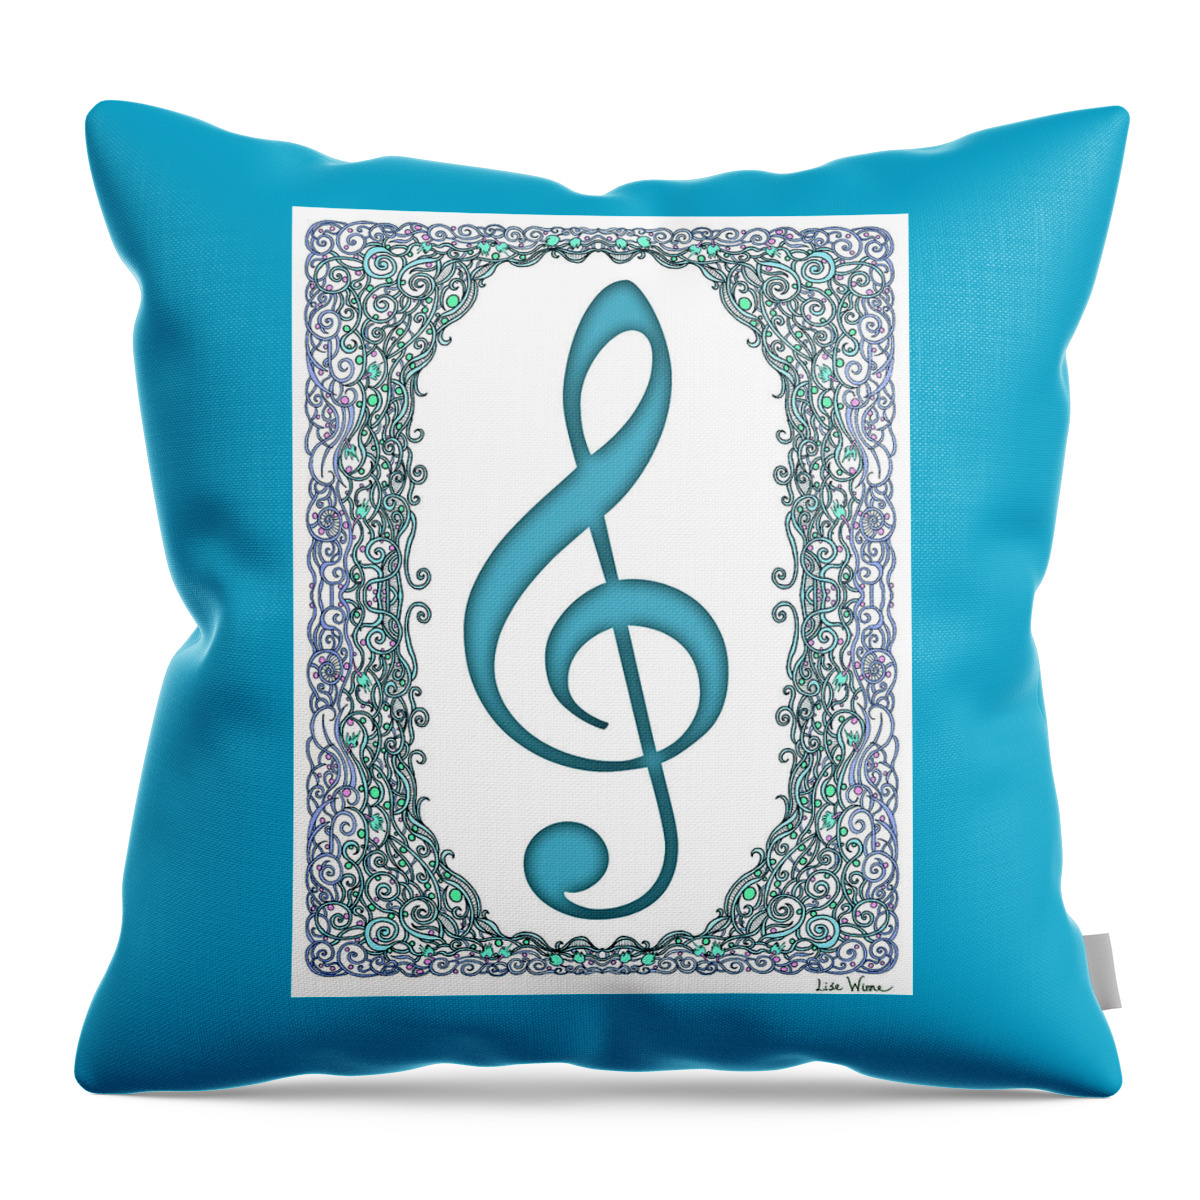 Lise Winne Throw Pillow featuring the digital art Turquoise Treble Clef with Turquoise and Blue Border by Lise Winne